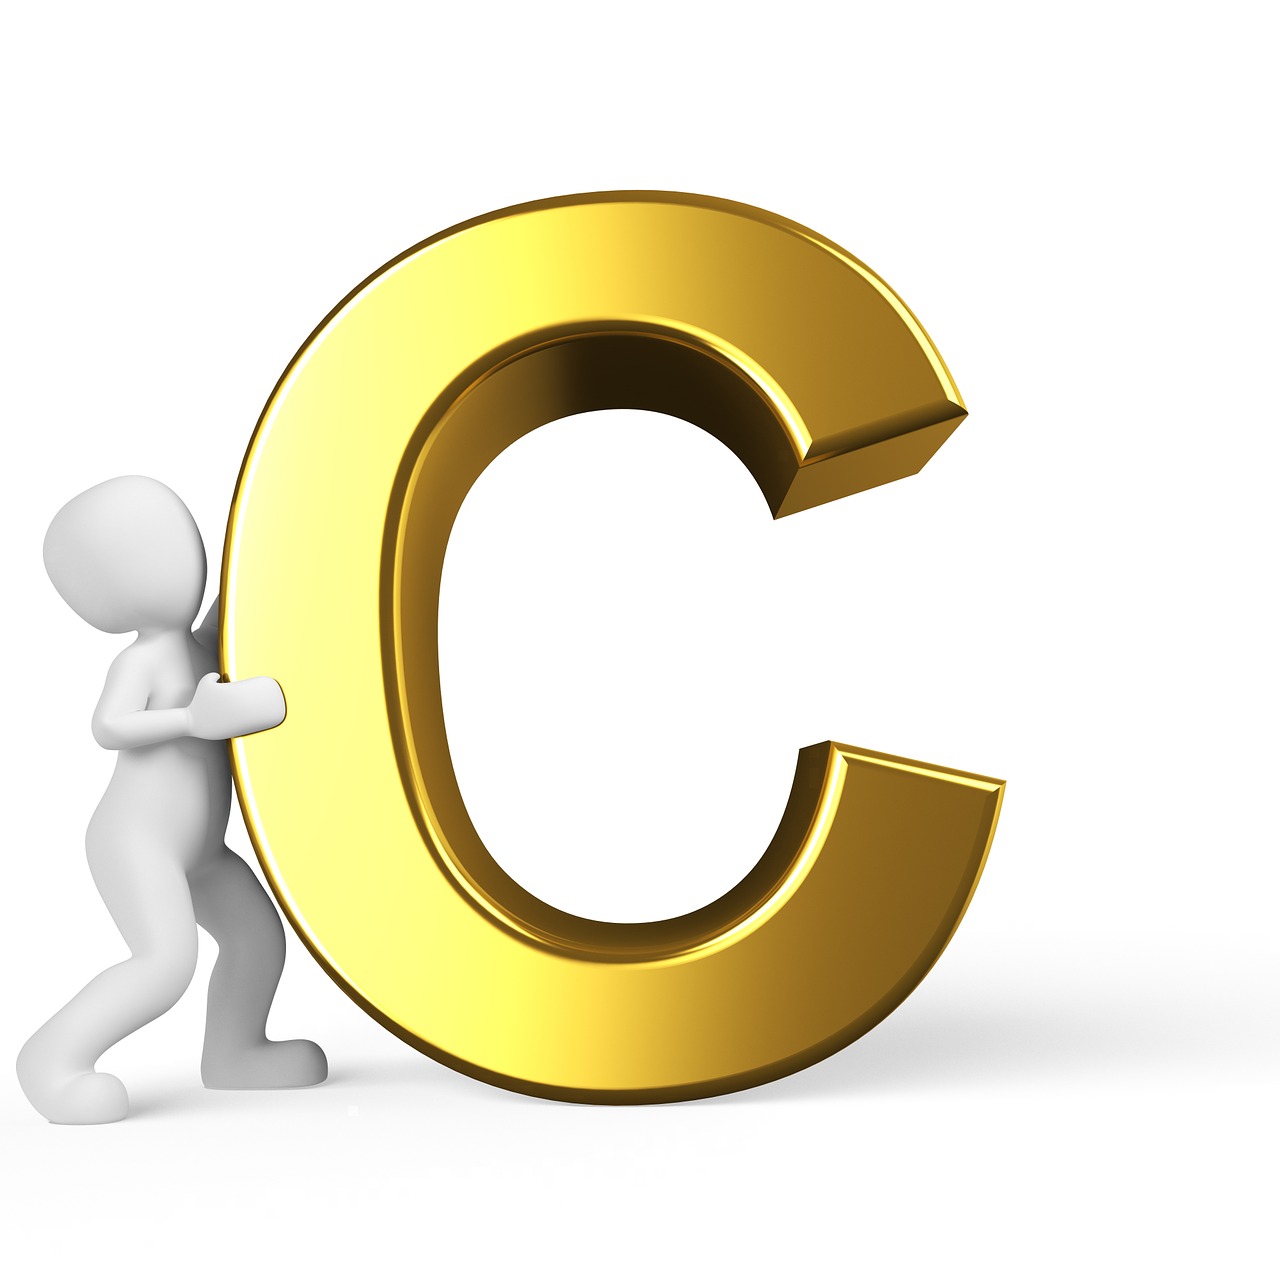 Download free photo of C,letter,alphabet,alphabetically,abc - from